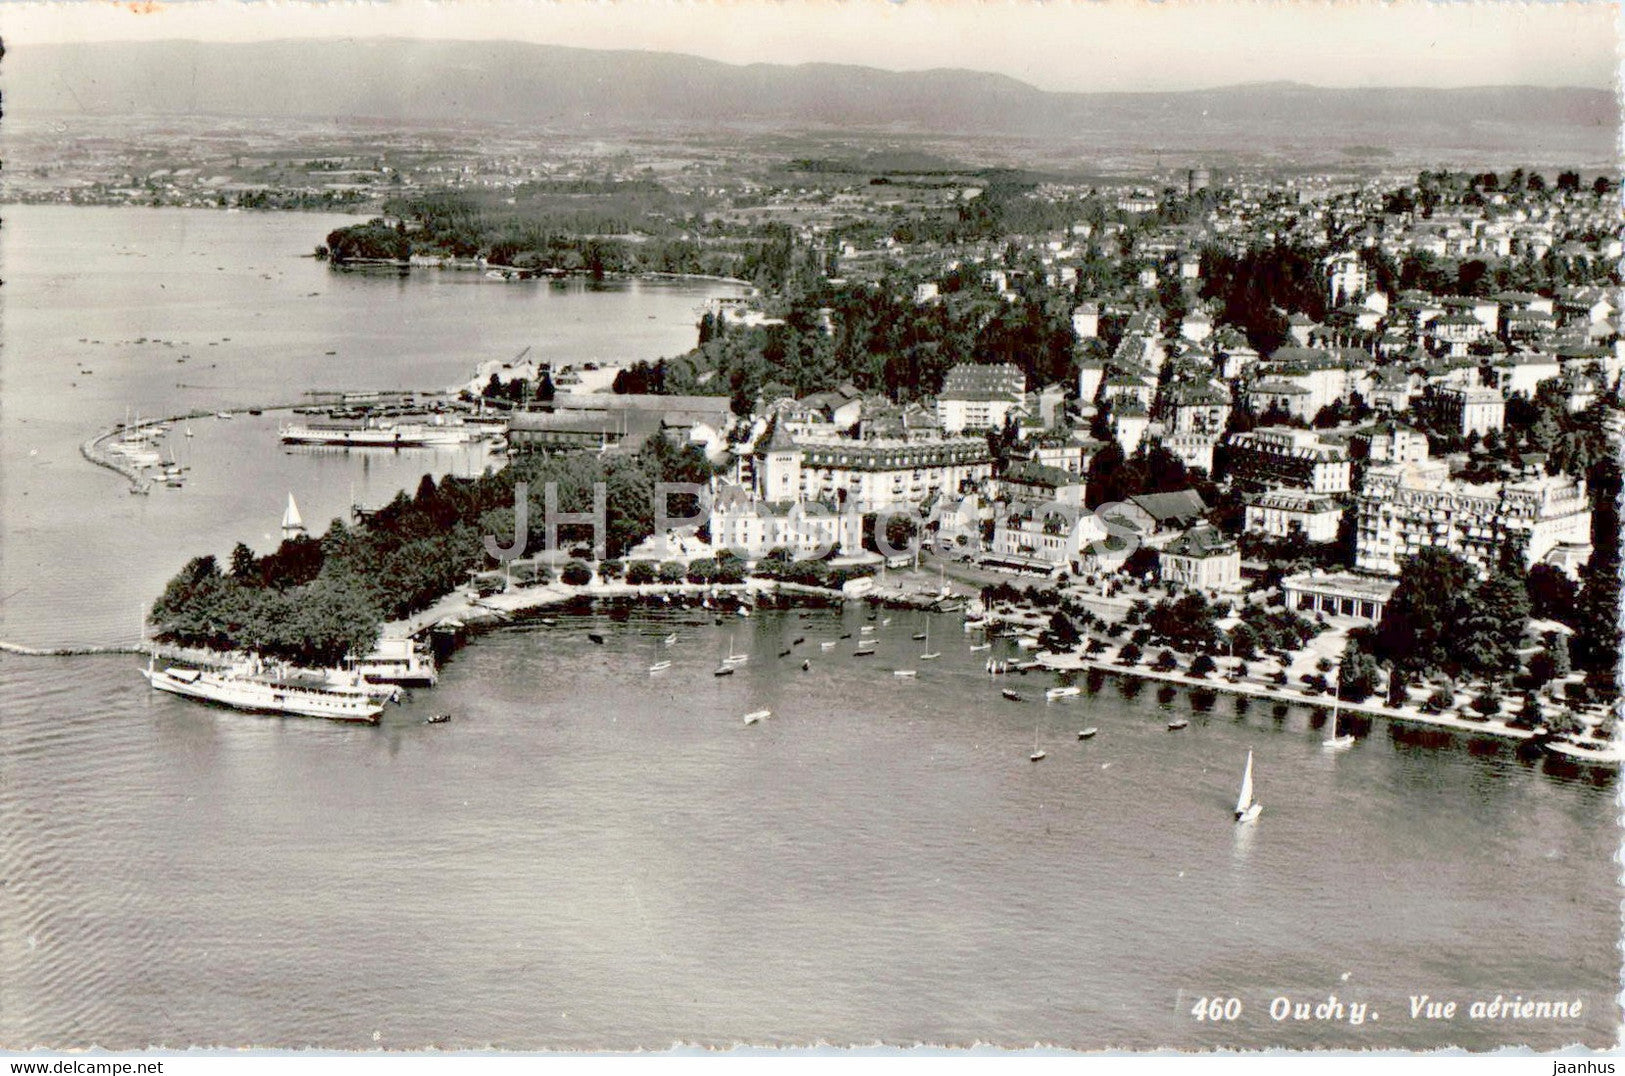 Ouchy - Vue aerienne - aerieal view - 460 - 1956 - old postcard - Switzerland - used - JH Postcards